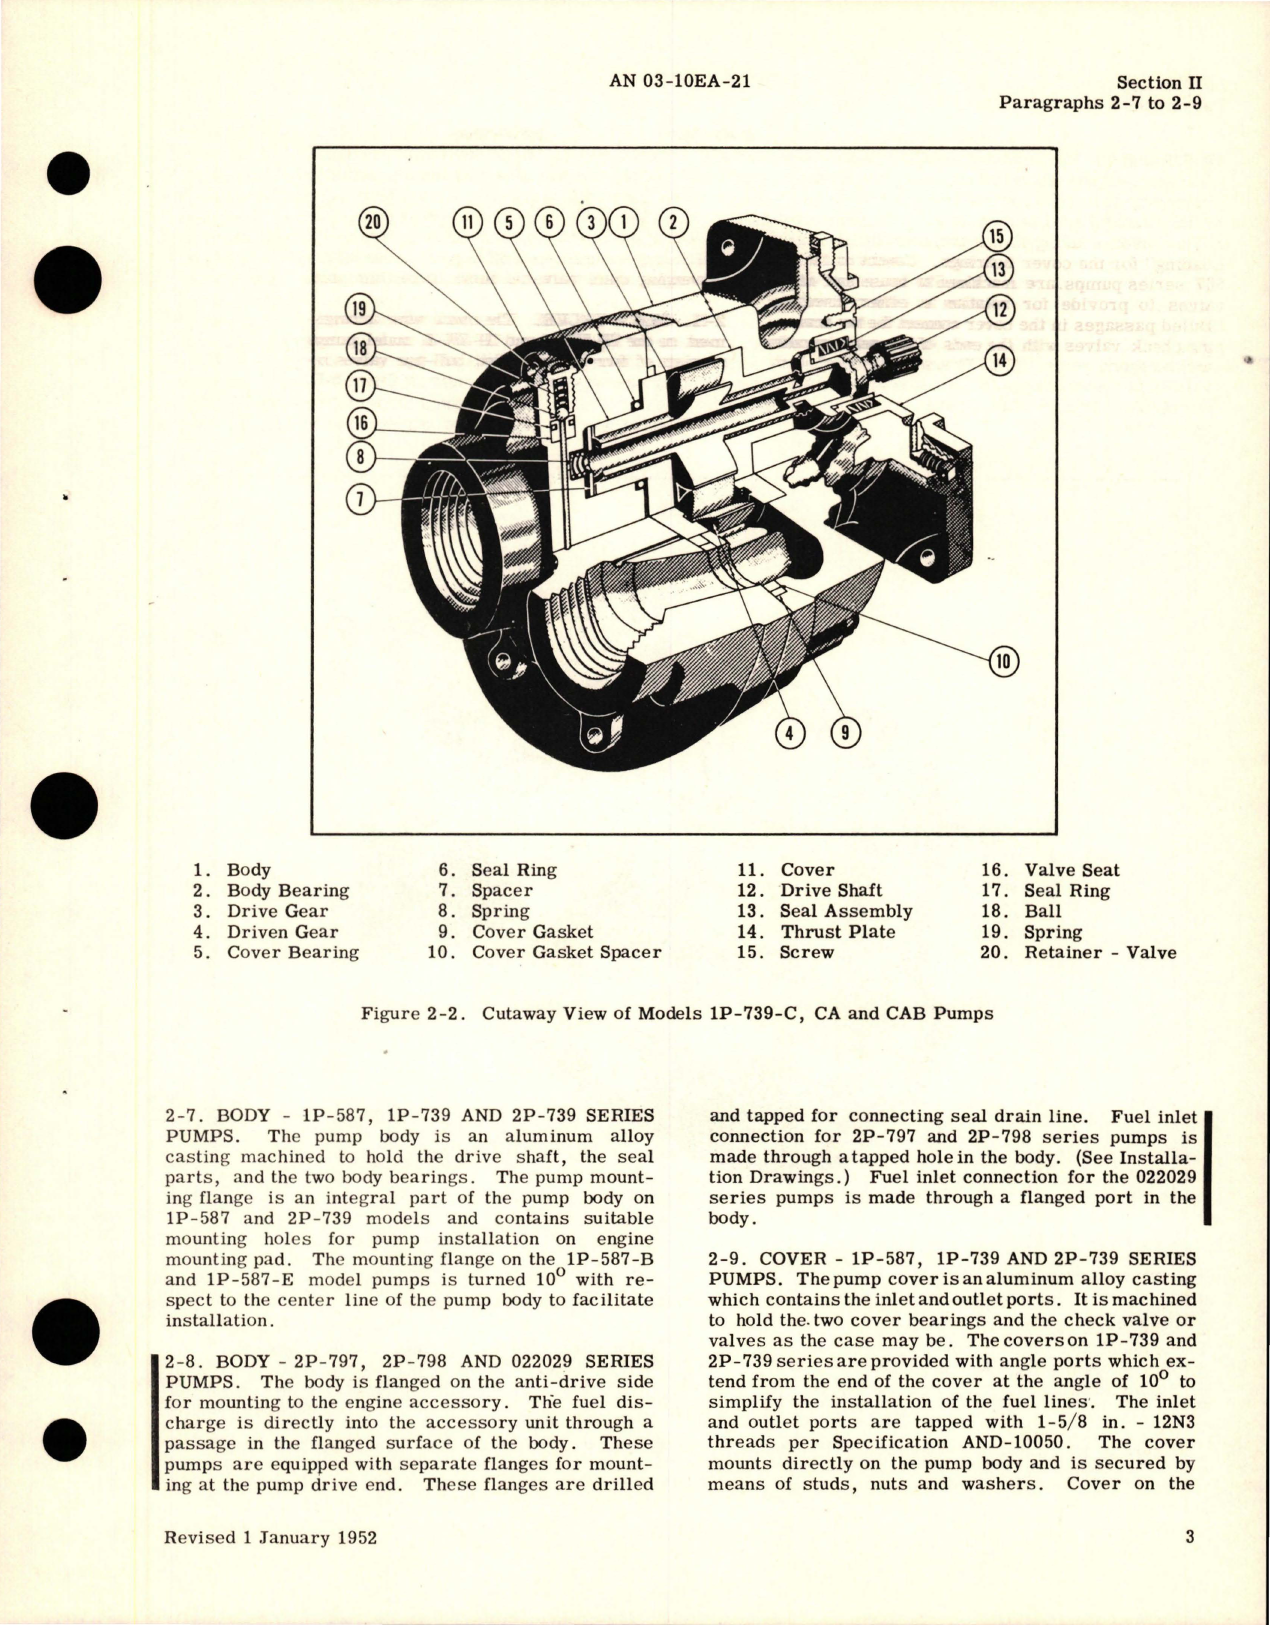 Sample page 9 from AirCorps Library document: Operation, Service and Overhaul Instructions with Parts for Engine Driven Gear Type High Pressure Fuel Pumps